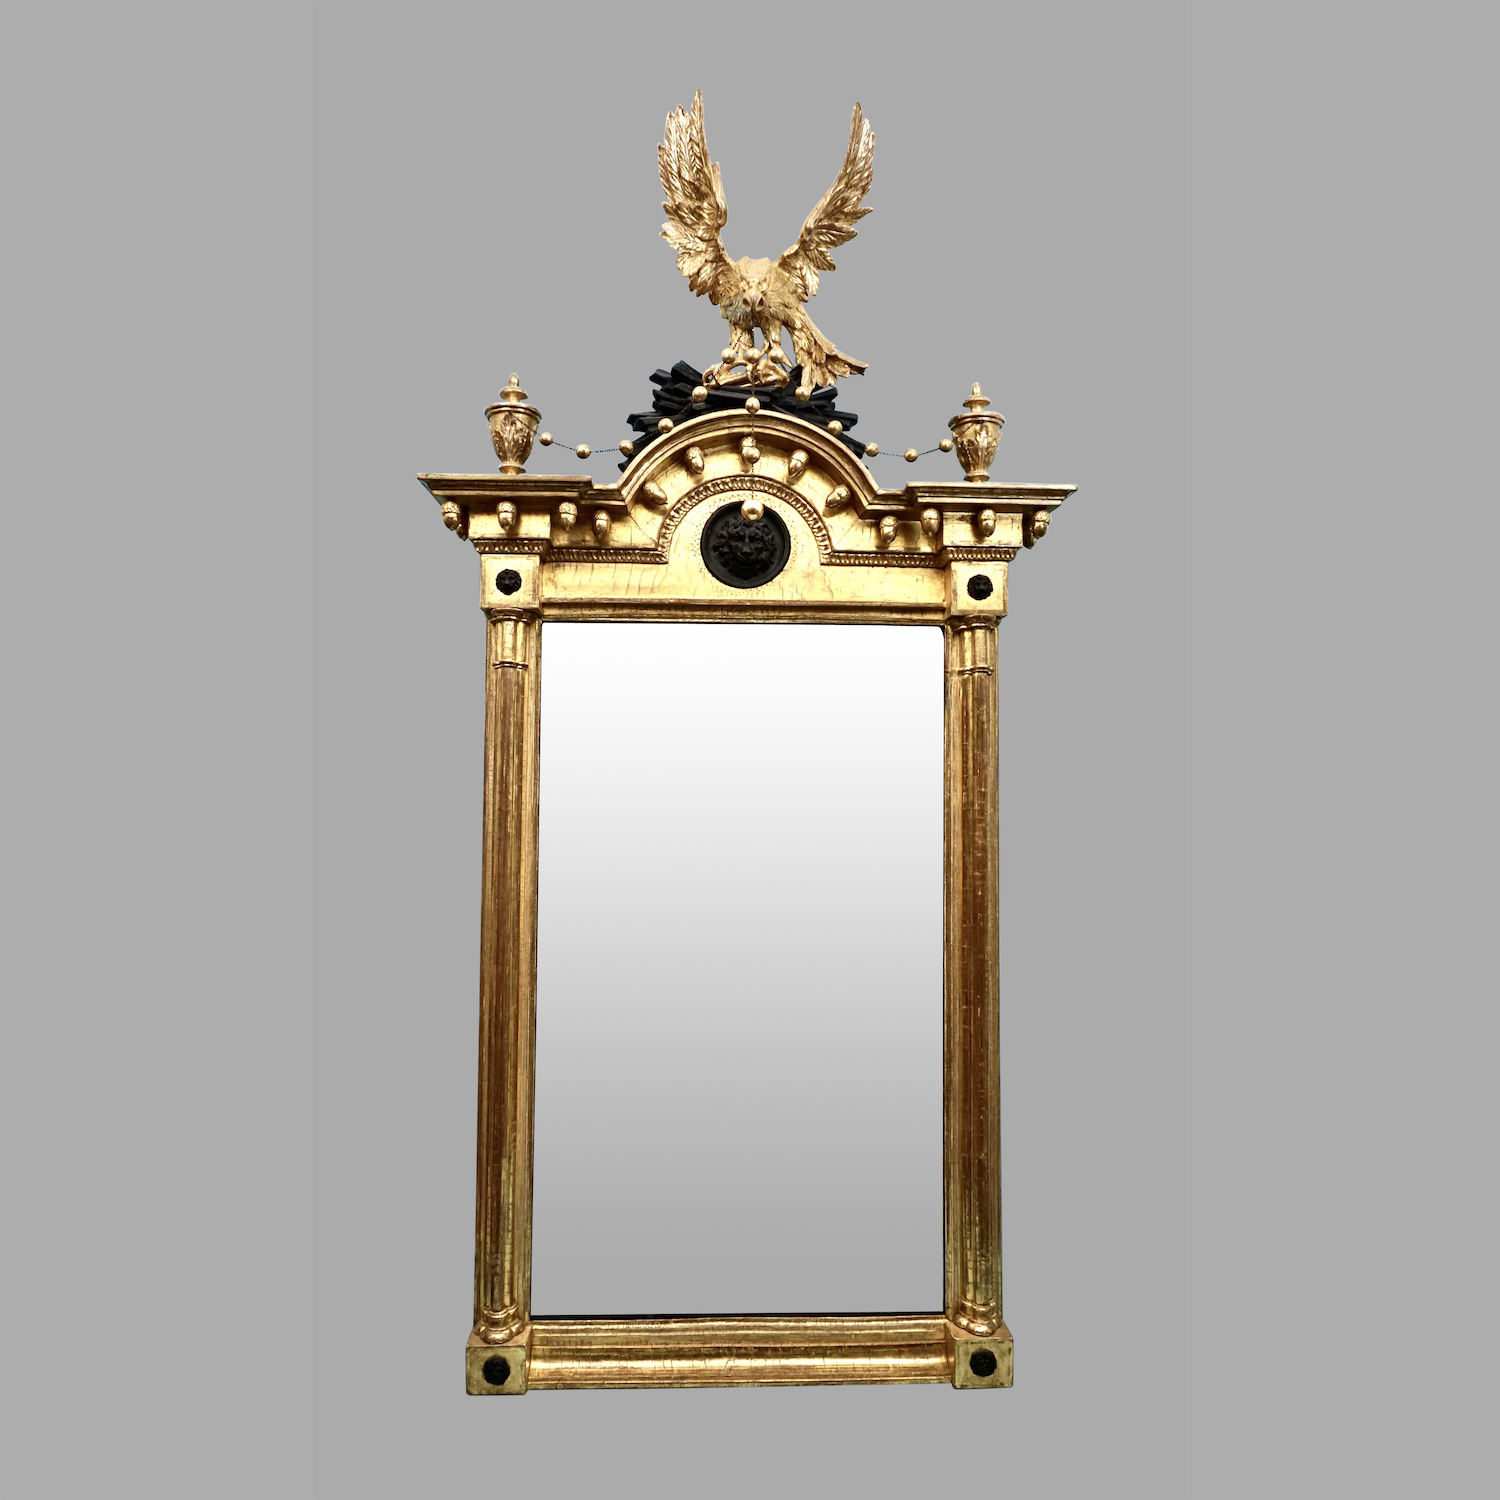 fine-regency-giltwood-mirror-with-carved-eagle-cresting-lions-mask-bosses-c523-1